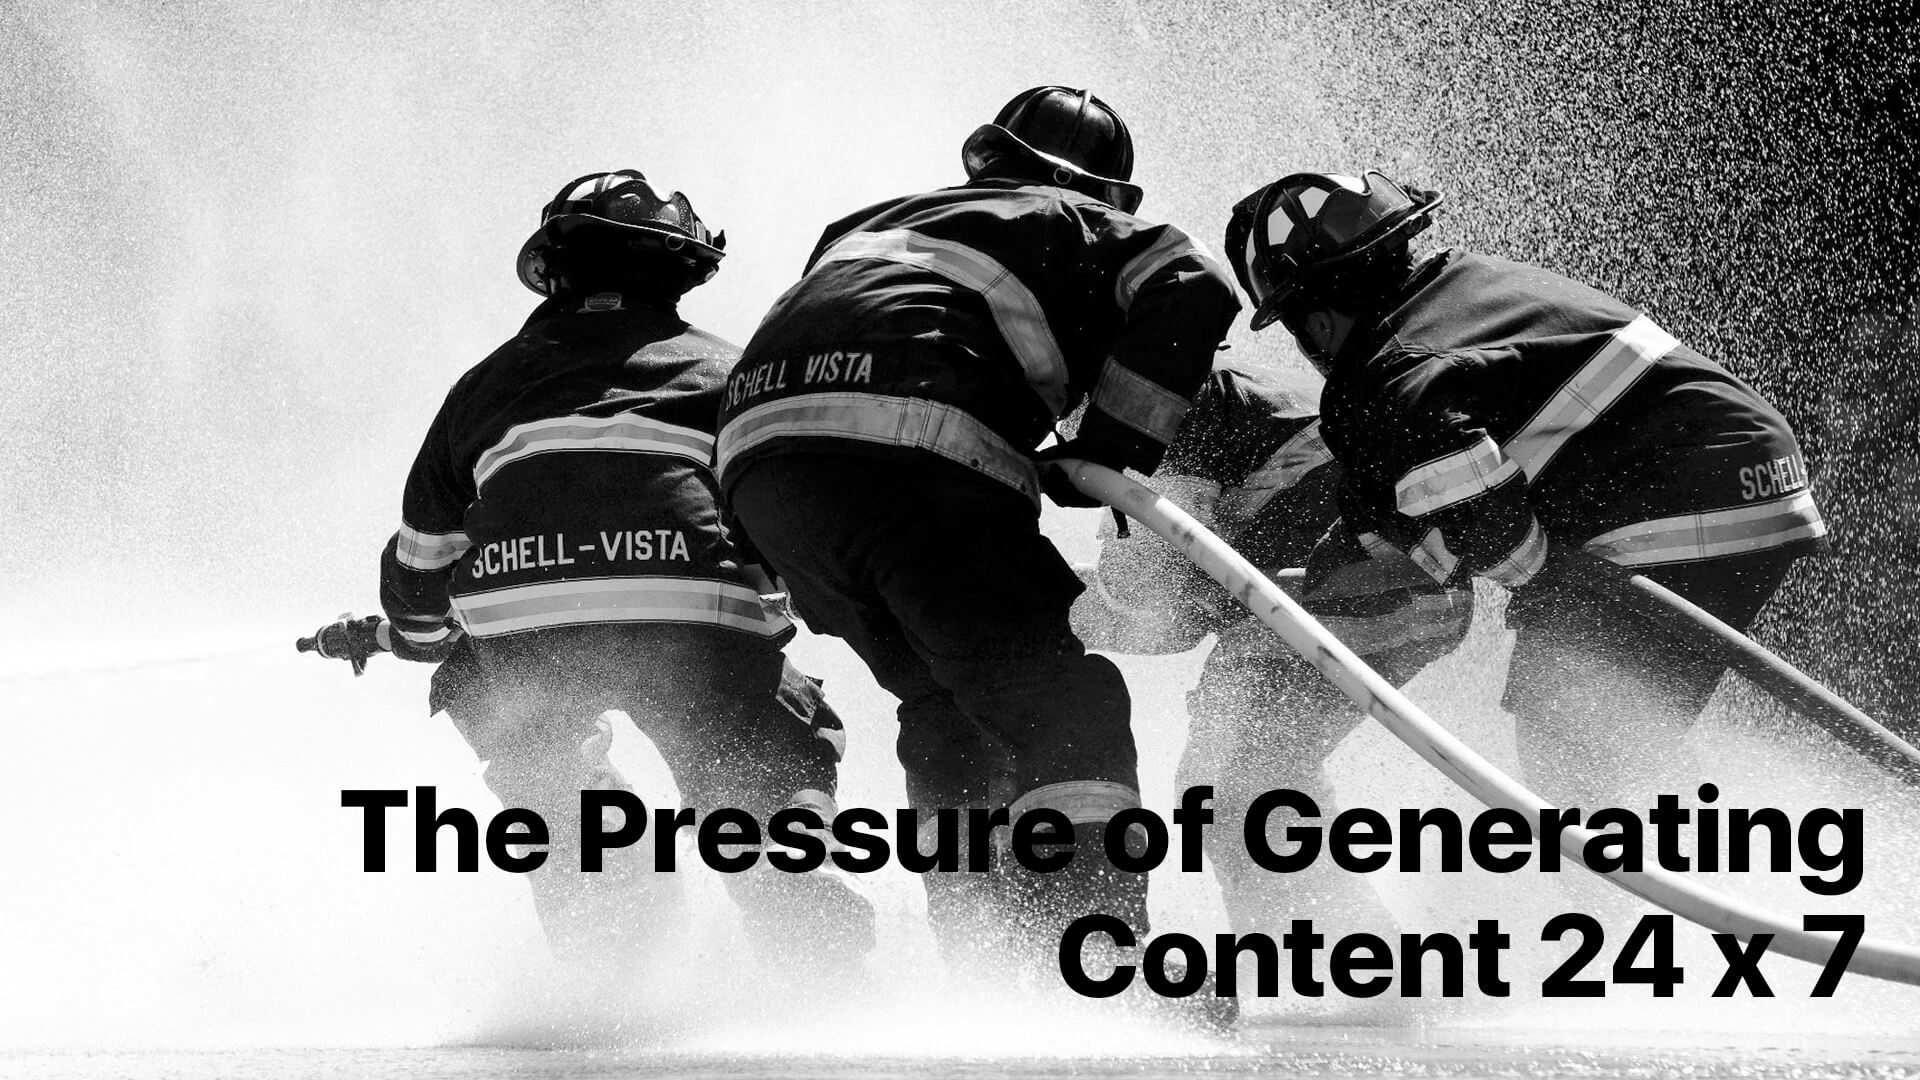 The Pressure of Generating Content on TV and Online